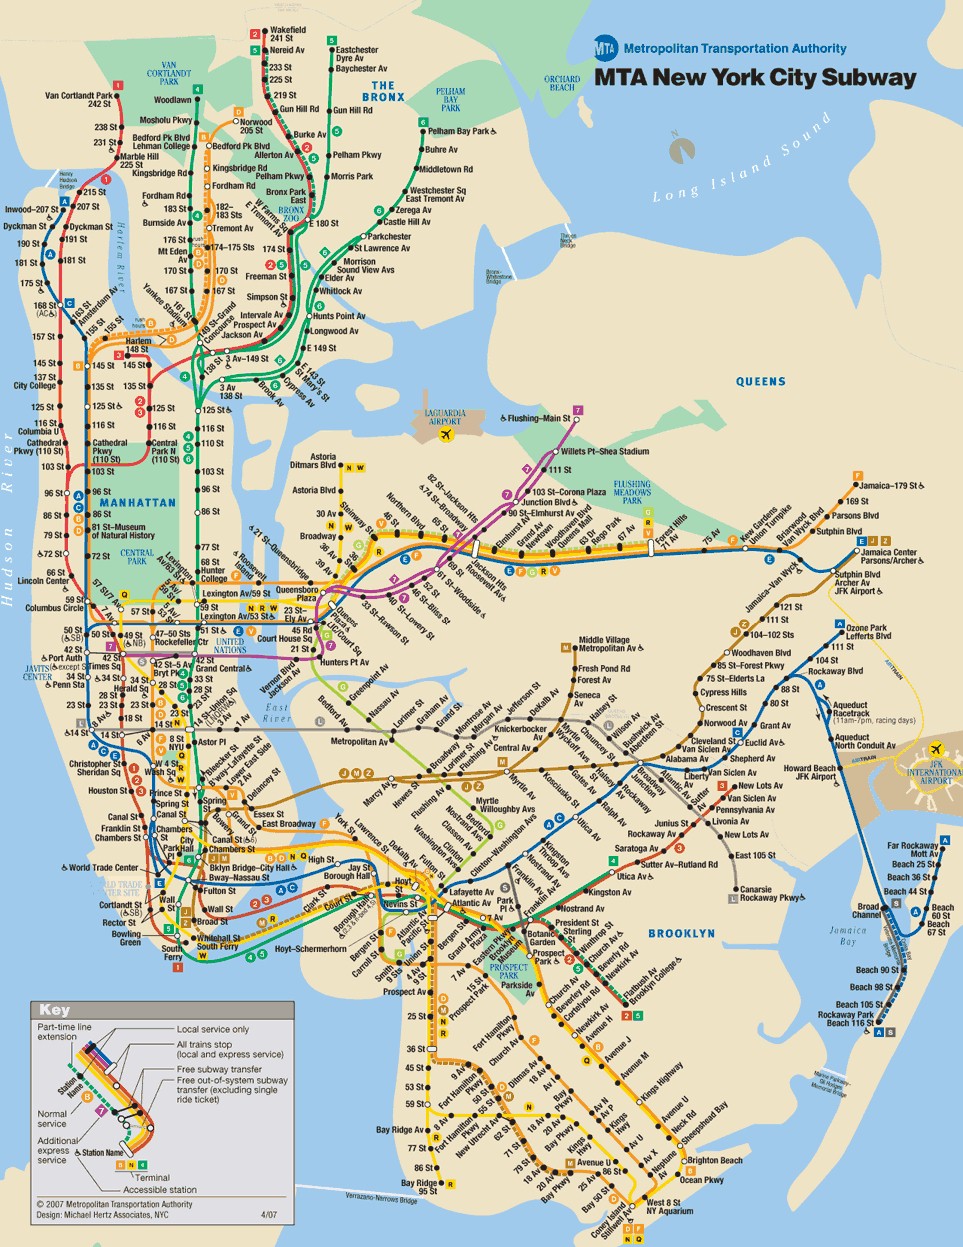 Here's a look at the New York City Subway map. Francisco Hernandez Jr. (13) spent 11 days riding random trains all over the system. I'm so jealous.